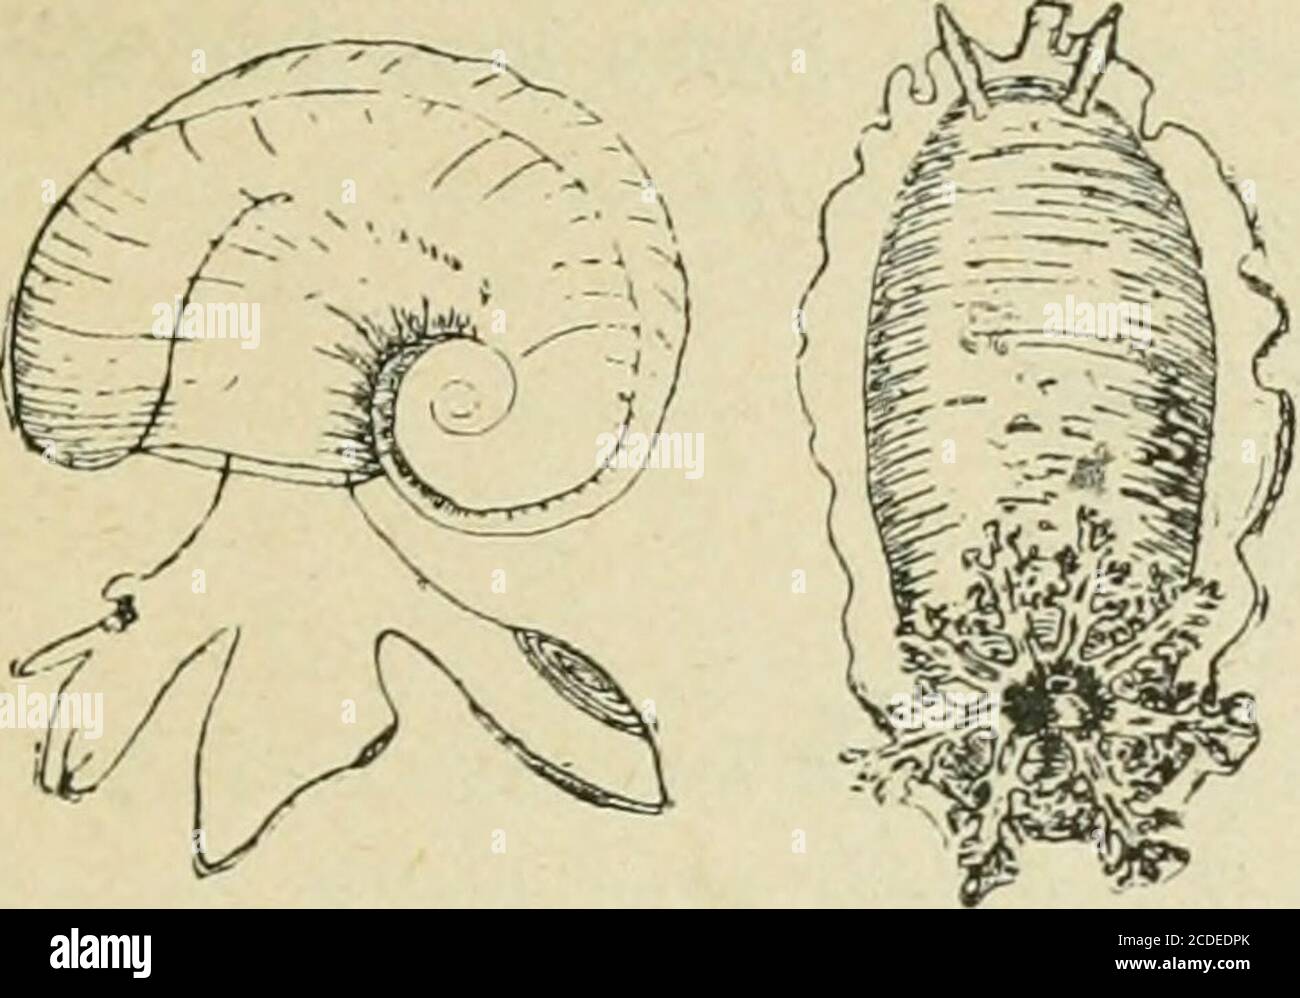 . An introduction to zoology : for the use of high schools . organ is situated in front of the heart, as it is inthe Puhnonata. Great variety of colour and form characterizes the shellsof ths Order, the Chitons, e.g., having a shell formed of eight transversepieces, the Limpets (Patella), a simple conical shell, while endless va- HIGH SCHOOL ZOOLOGY. 235 rieties of spirals are to be met with in t]ie Top-shells, (Turbo and Tro-chus), Olives, Cone-shells, Cowries (Cypriea), &c., &c. Some few Proso-branchiates, such as Helicina, Valvata, Paludina, are met with in freshwater (Figs. 159, 6 and 7). Stock Photo